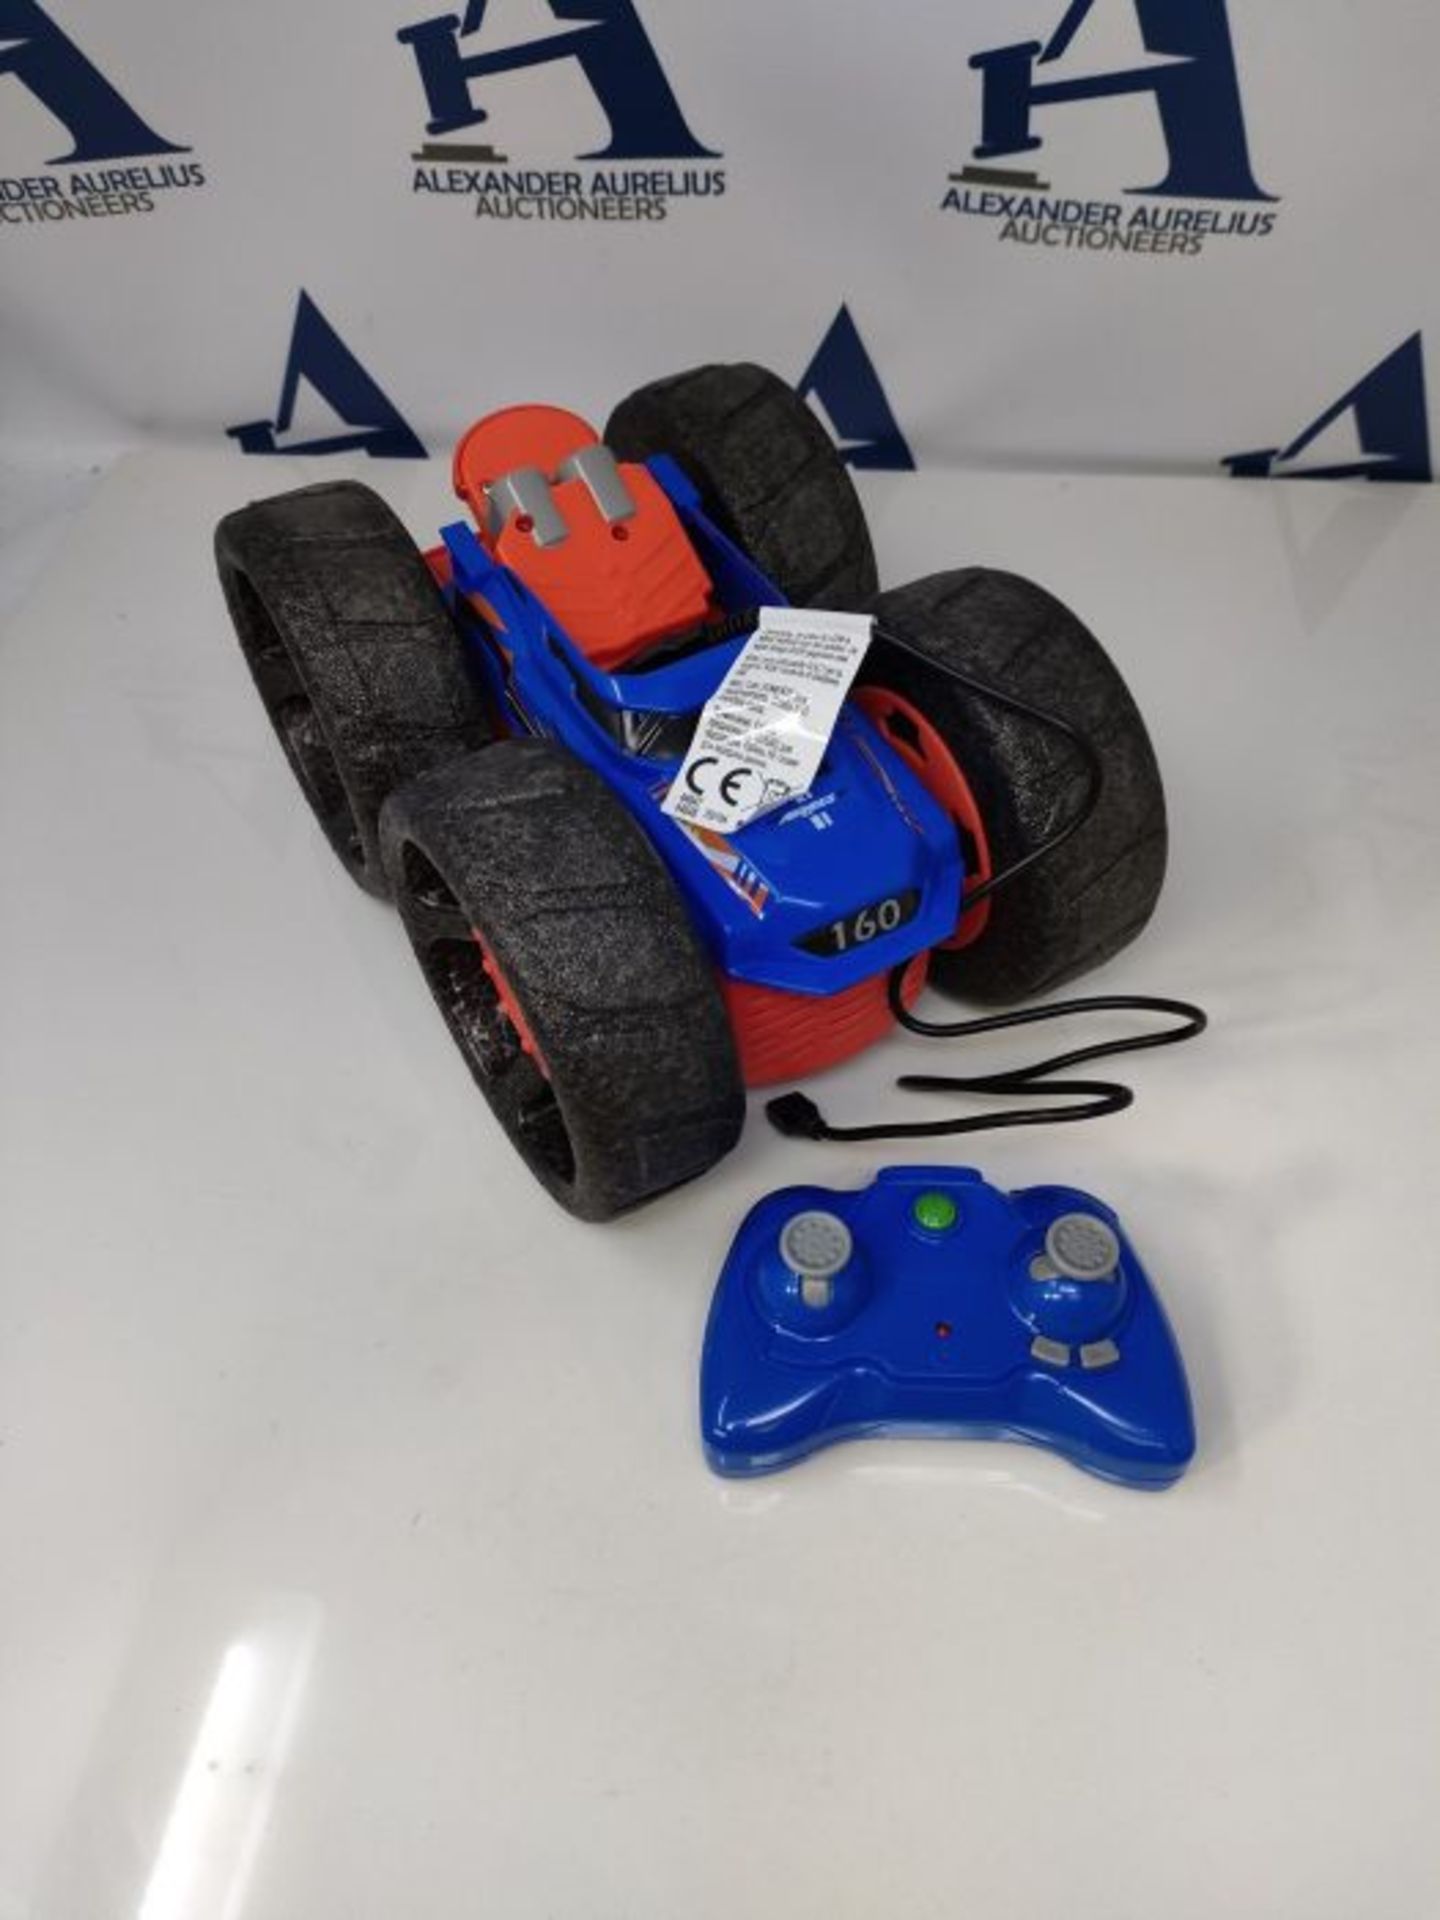 Air Hogs Super Soft, Jump Fury with Zero-Damage Wheels, Extreme Jumping Remote Control - Image 3 of 3